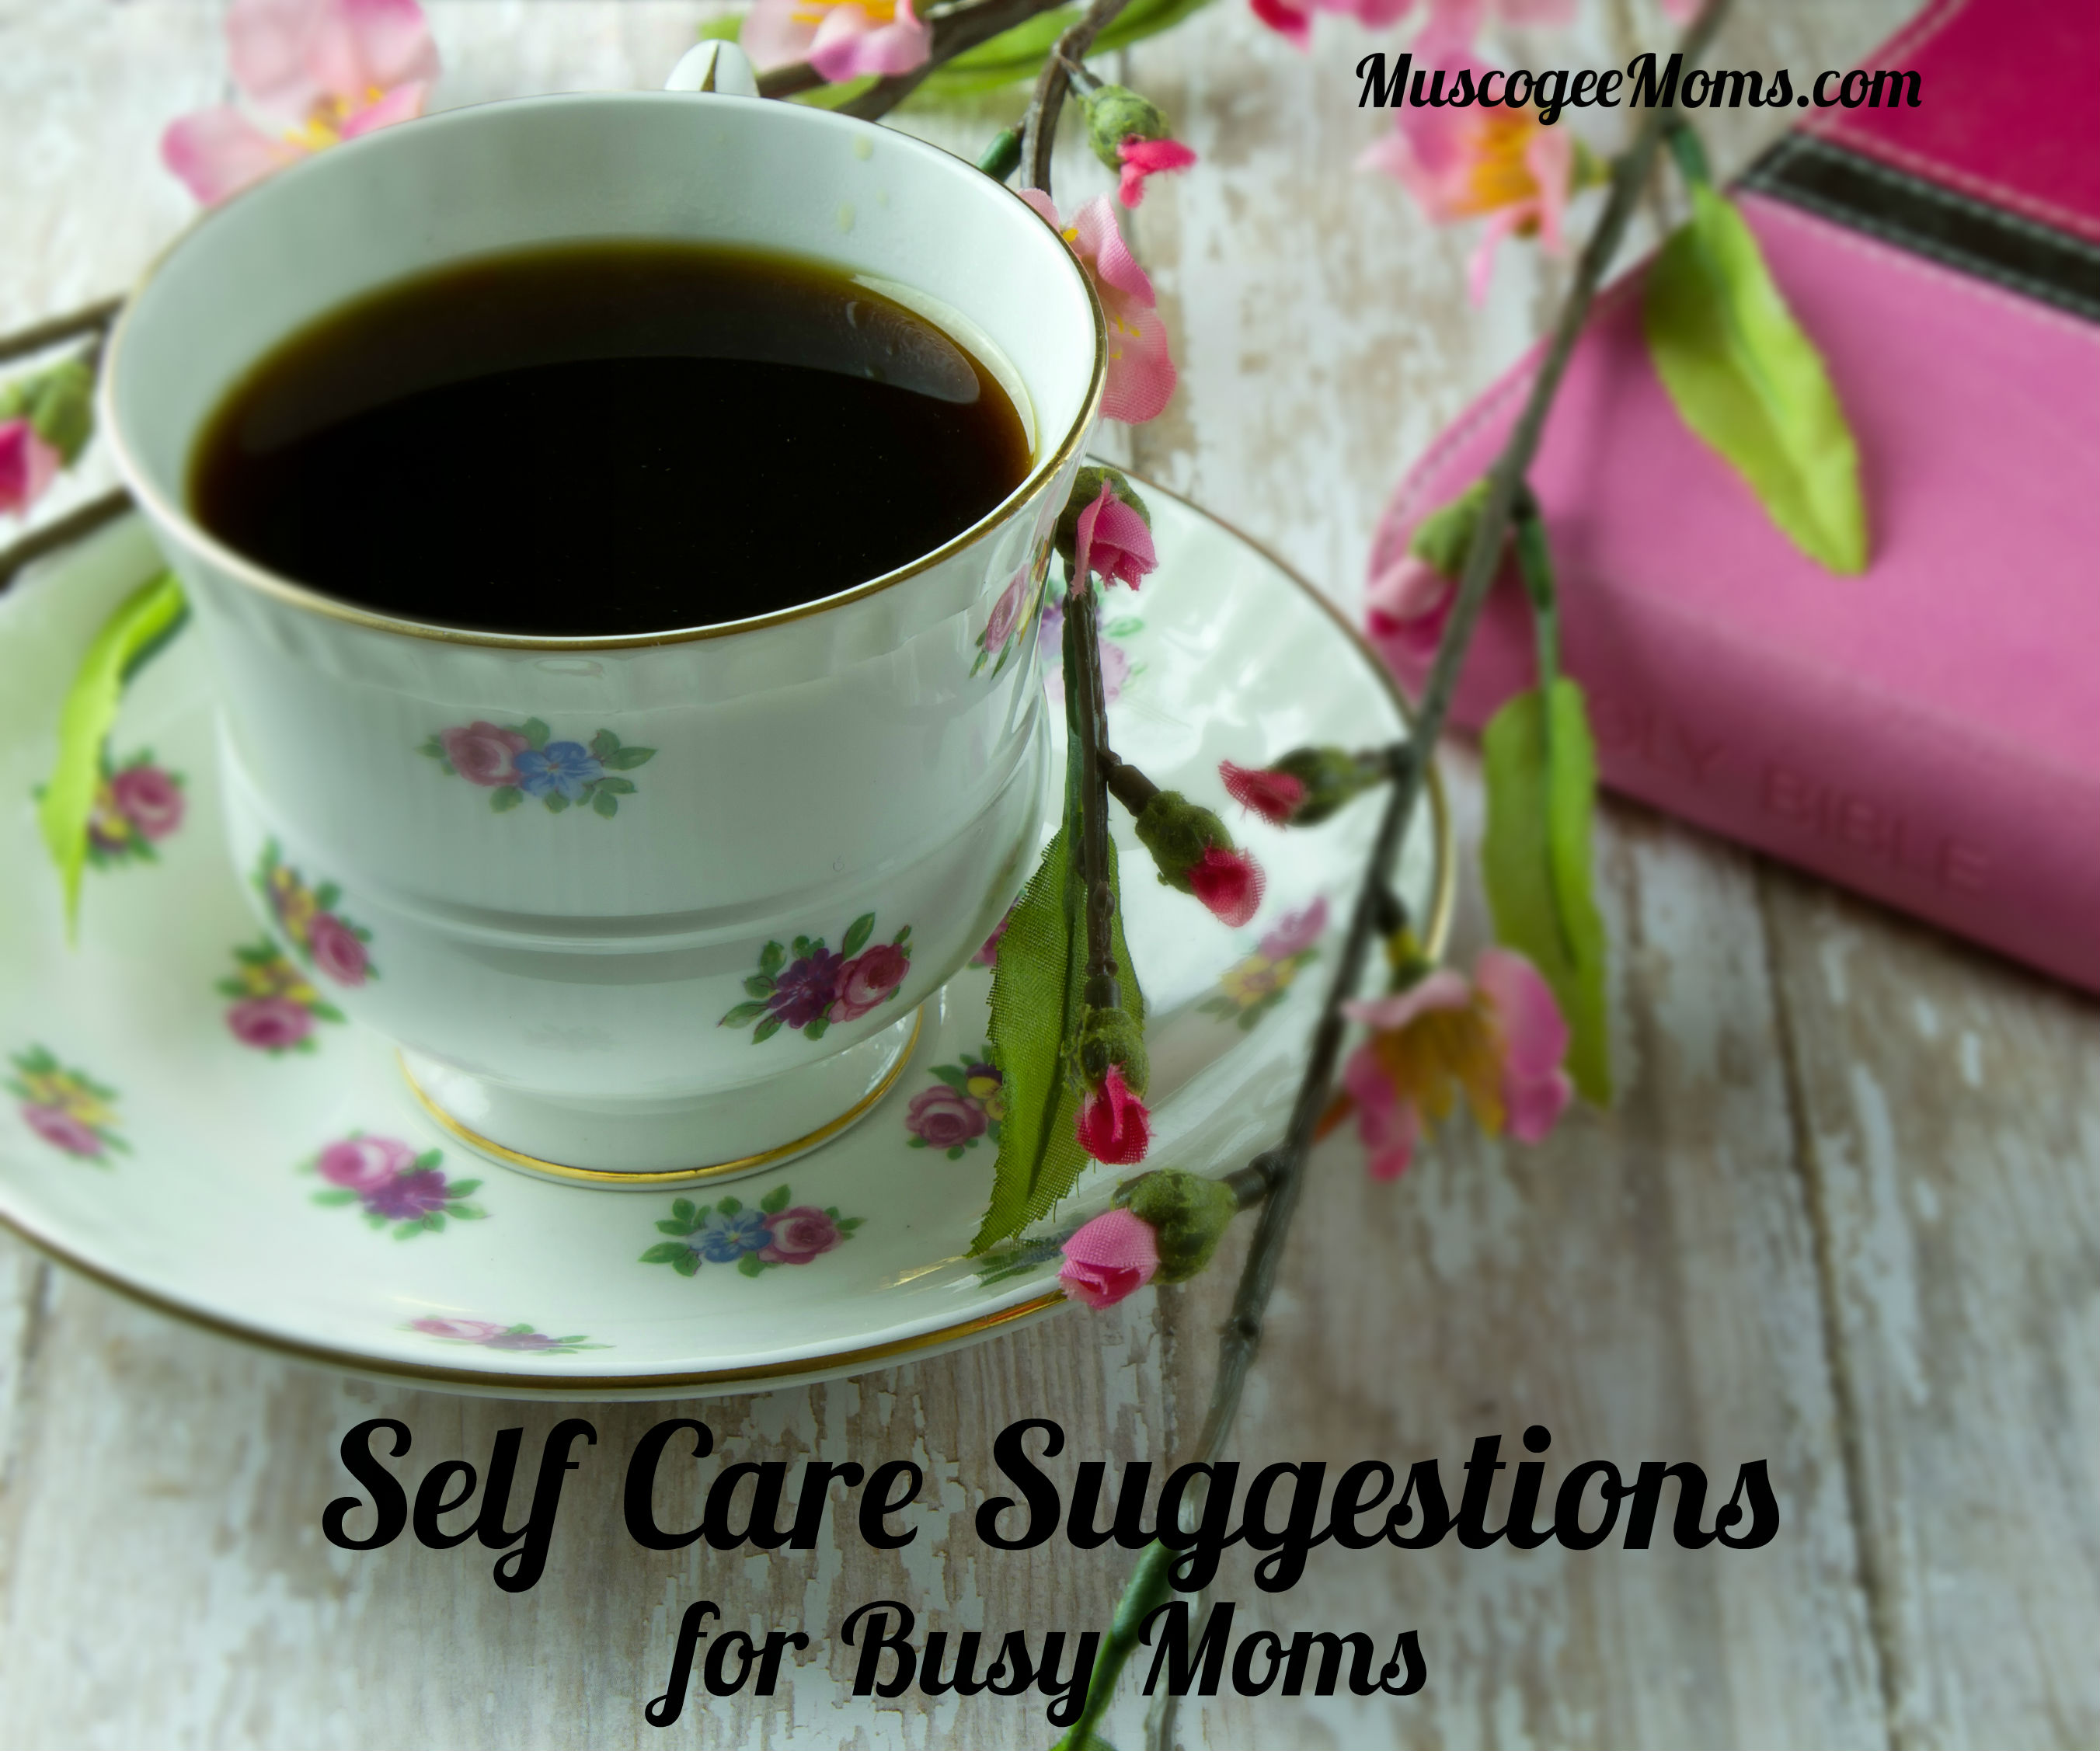 Self-Care Suggestions for Busy Moms